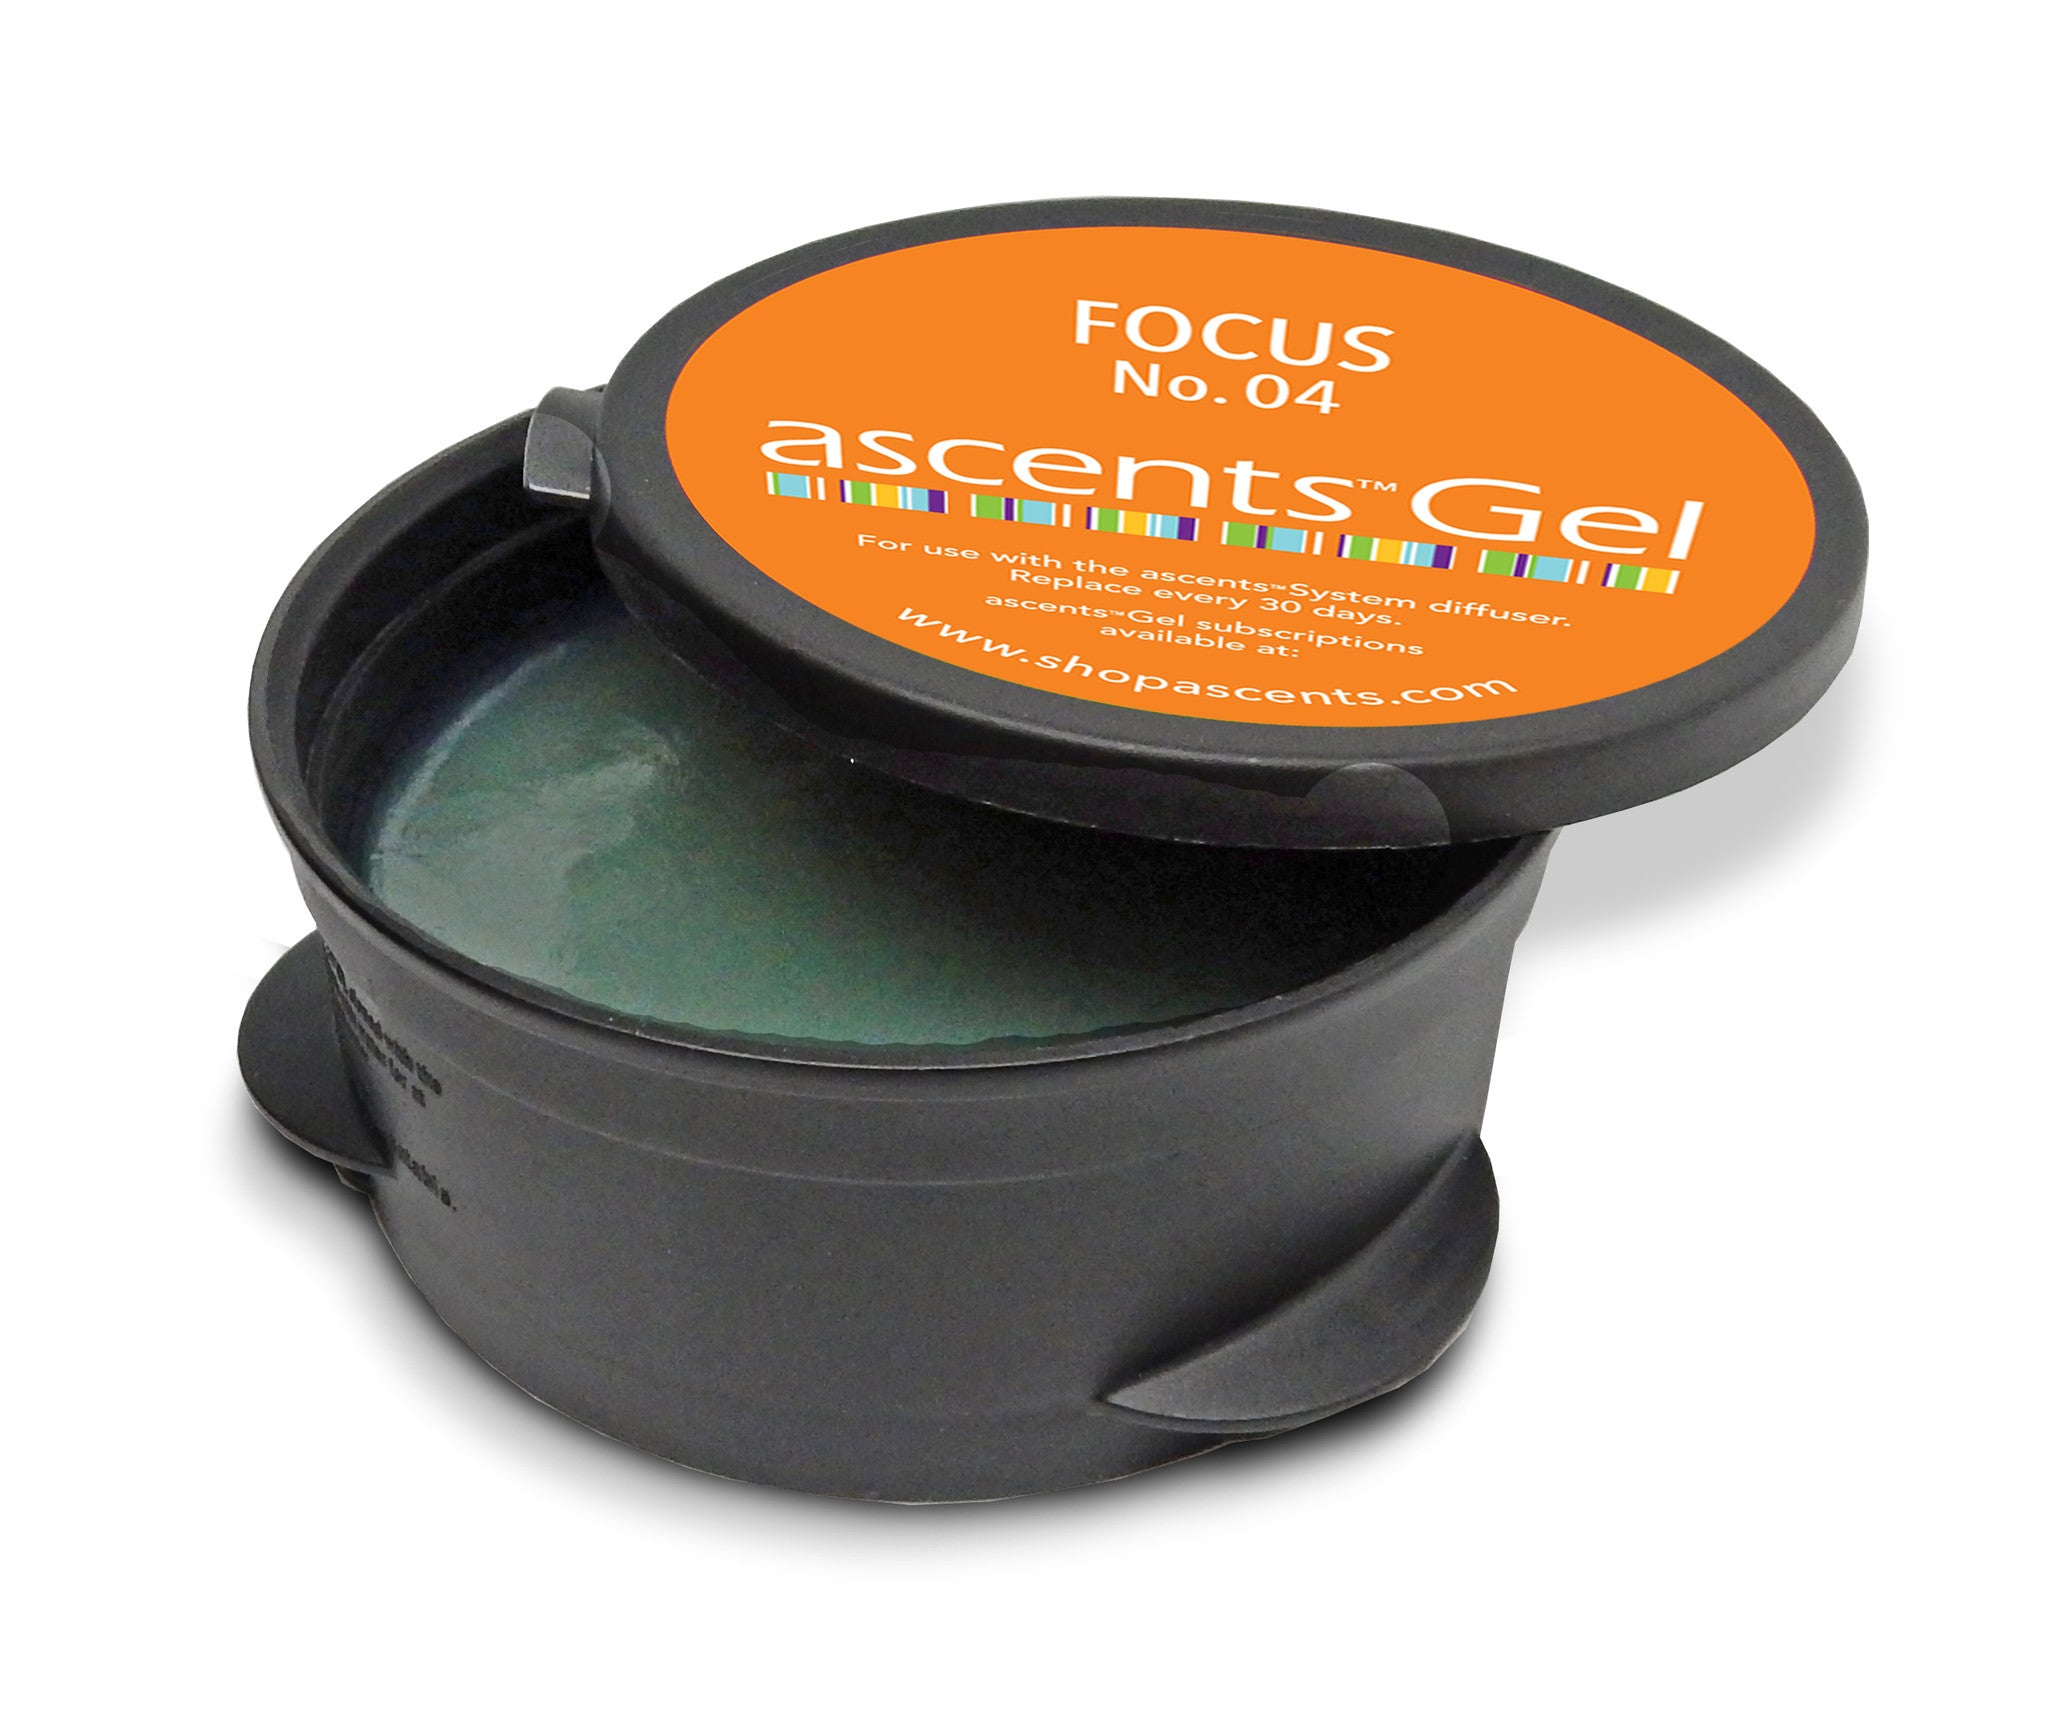 Focus Gel - For Concentration & Productivity